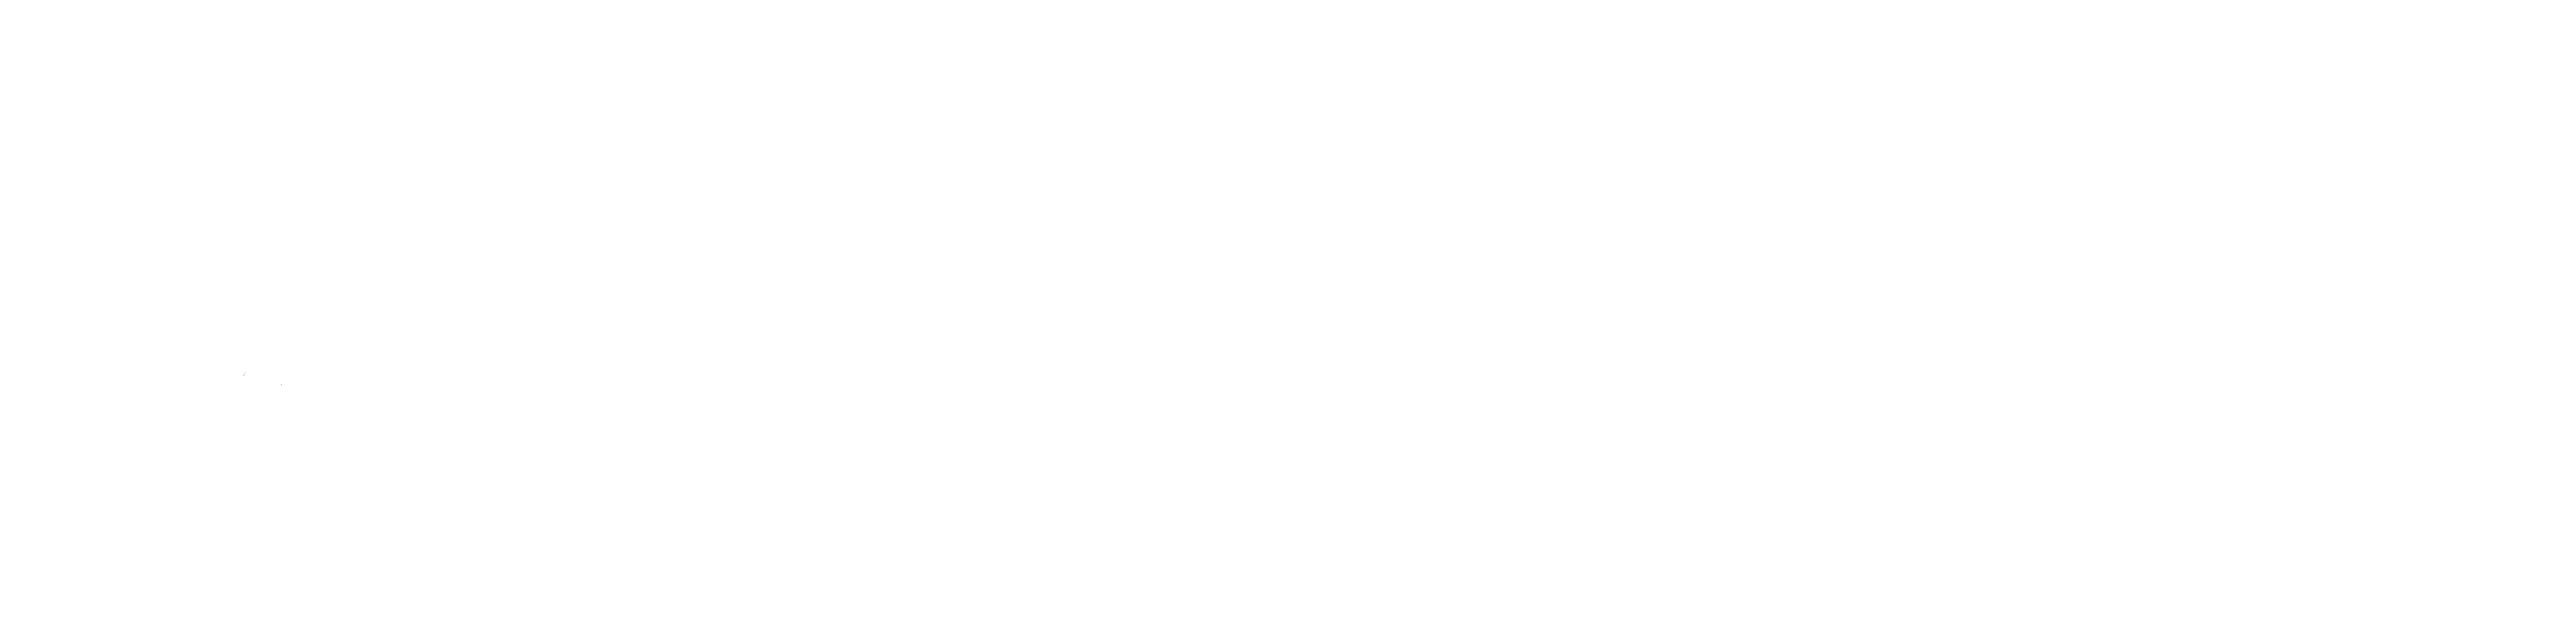 Cleve Cottage Cakery